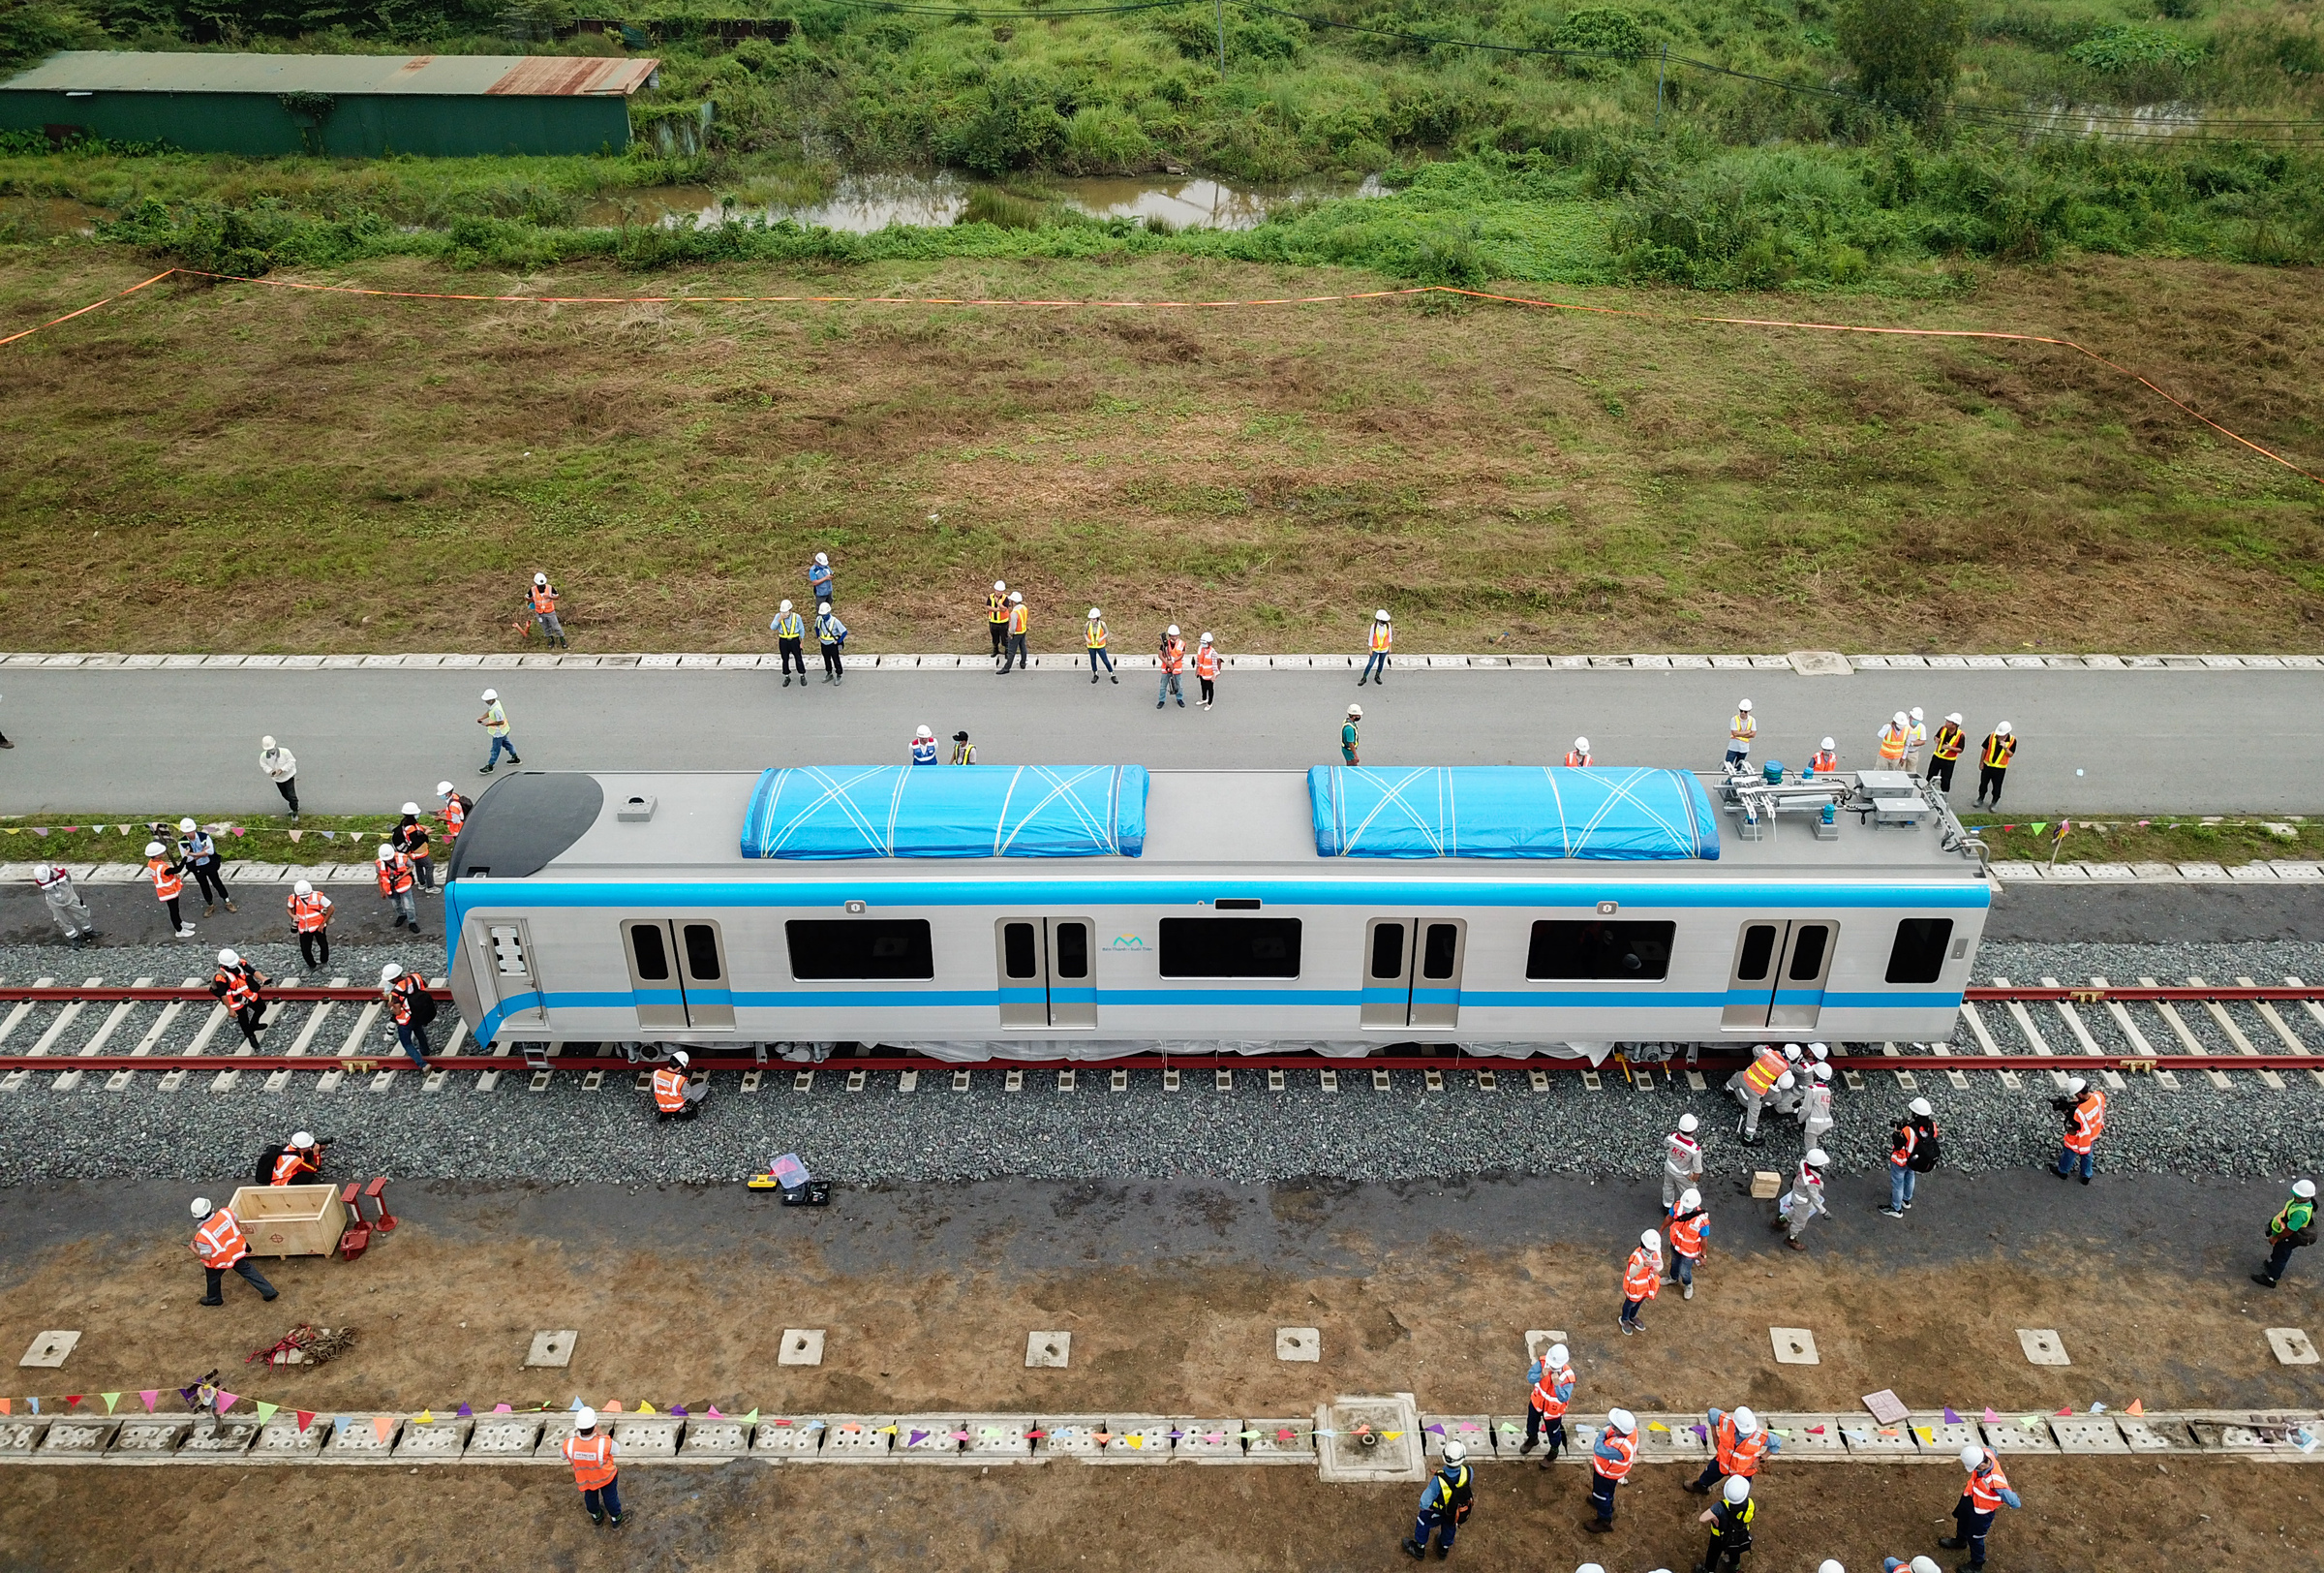 A metro train is installed on tracks at Long Binh Depot in HCMCs Thu Duc City in 2020. Photo by VnExpress/Quynh Tran